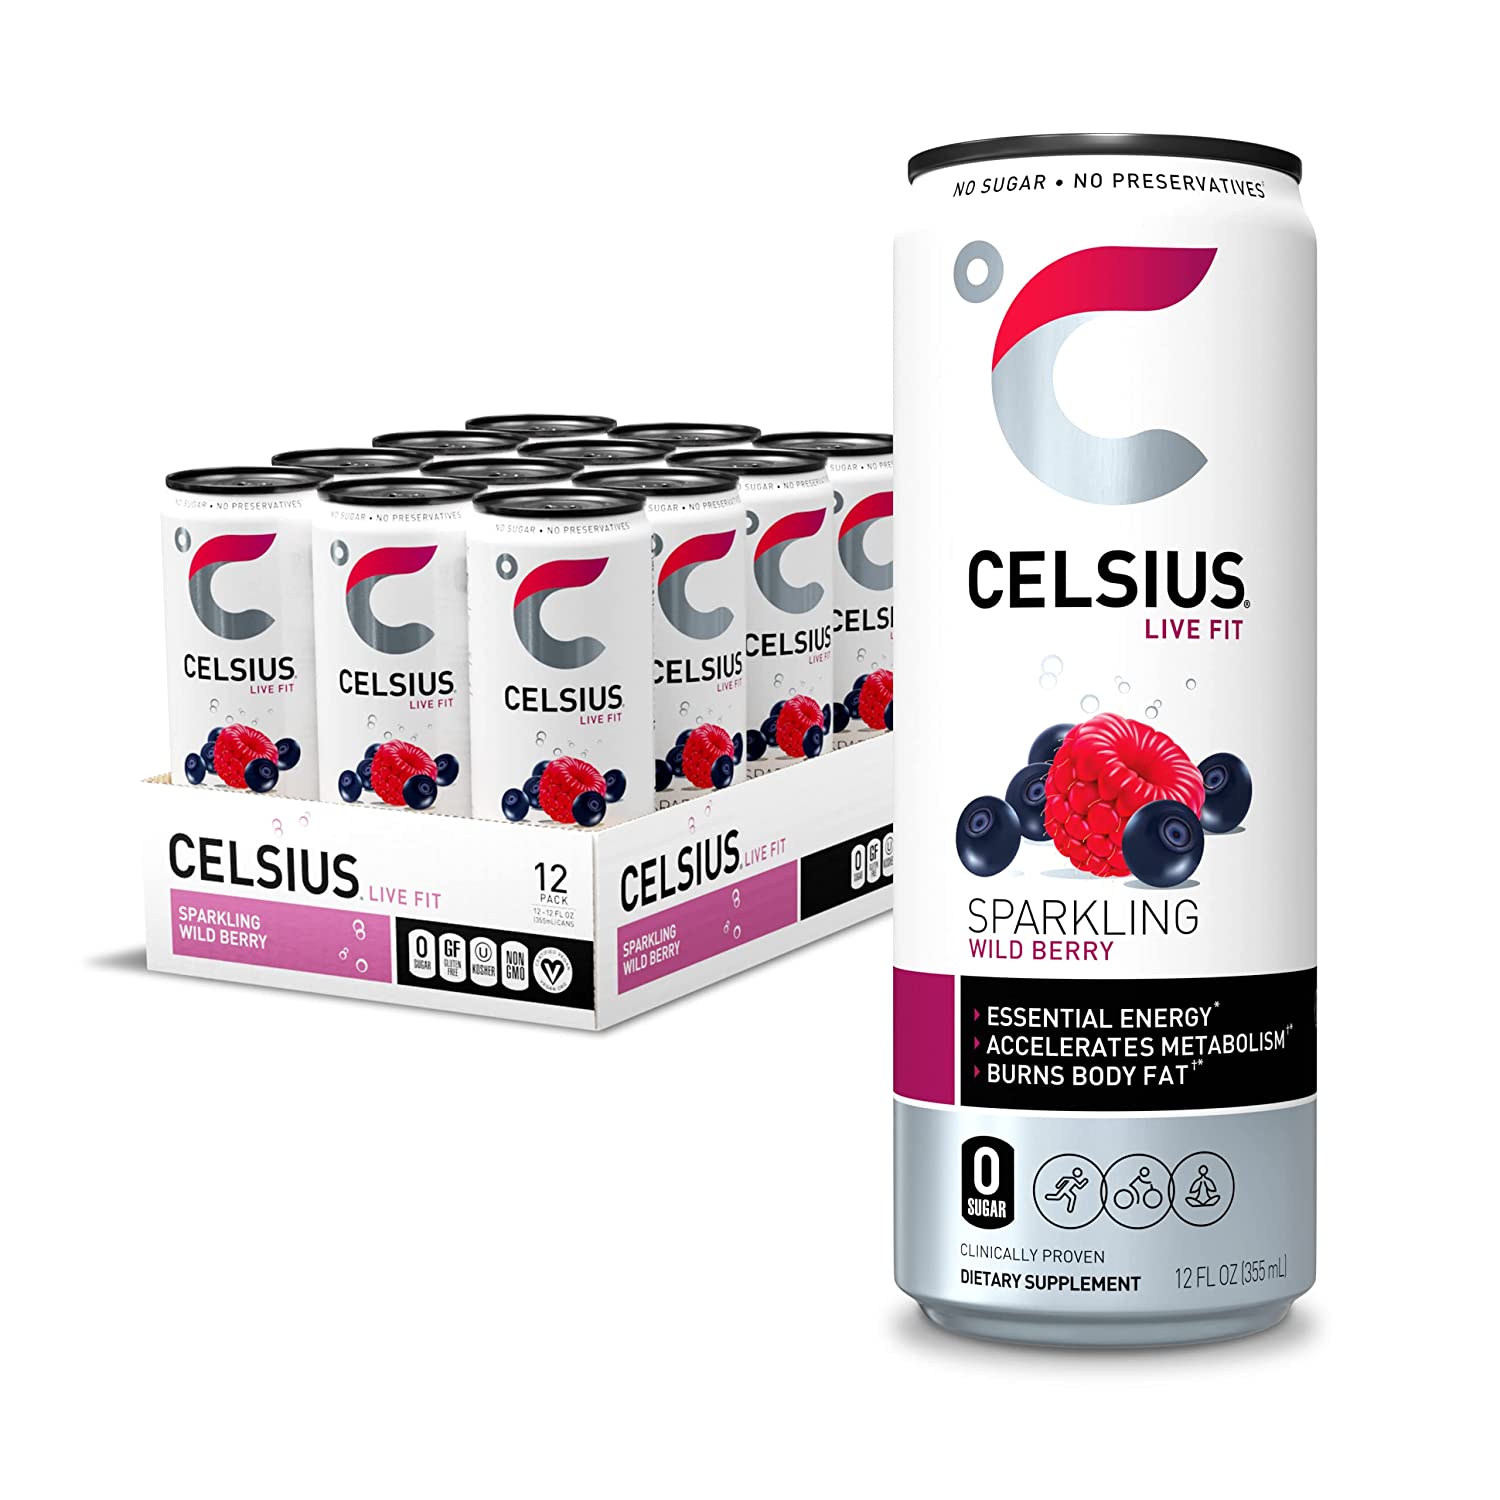 CELSIUS Essential Energy Drink 12 Fl Oz, Sparkling Wild Berry (Pack of 12) $15.24 @ Amazon